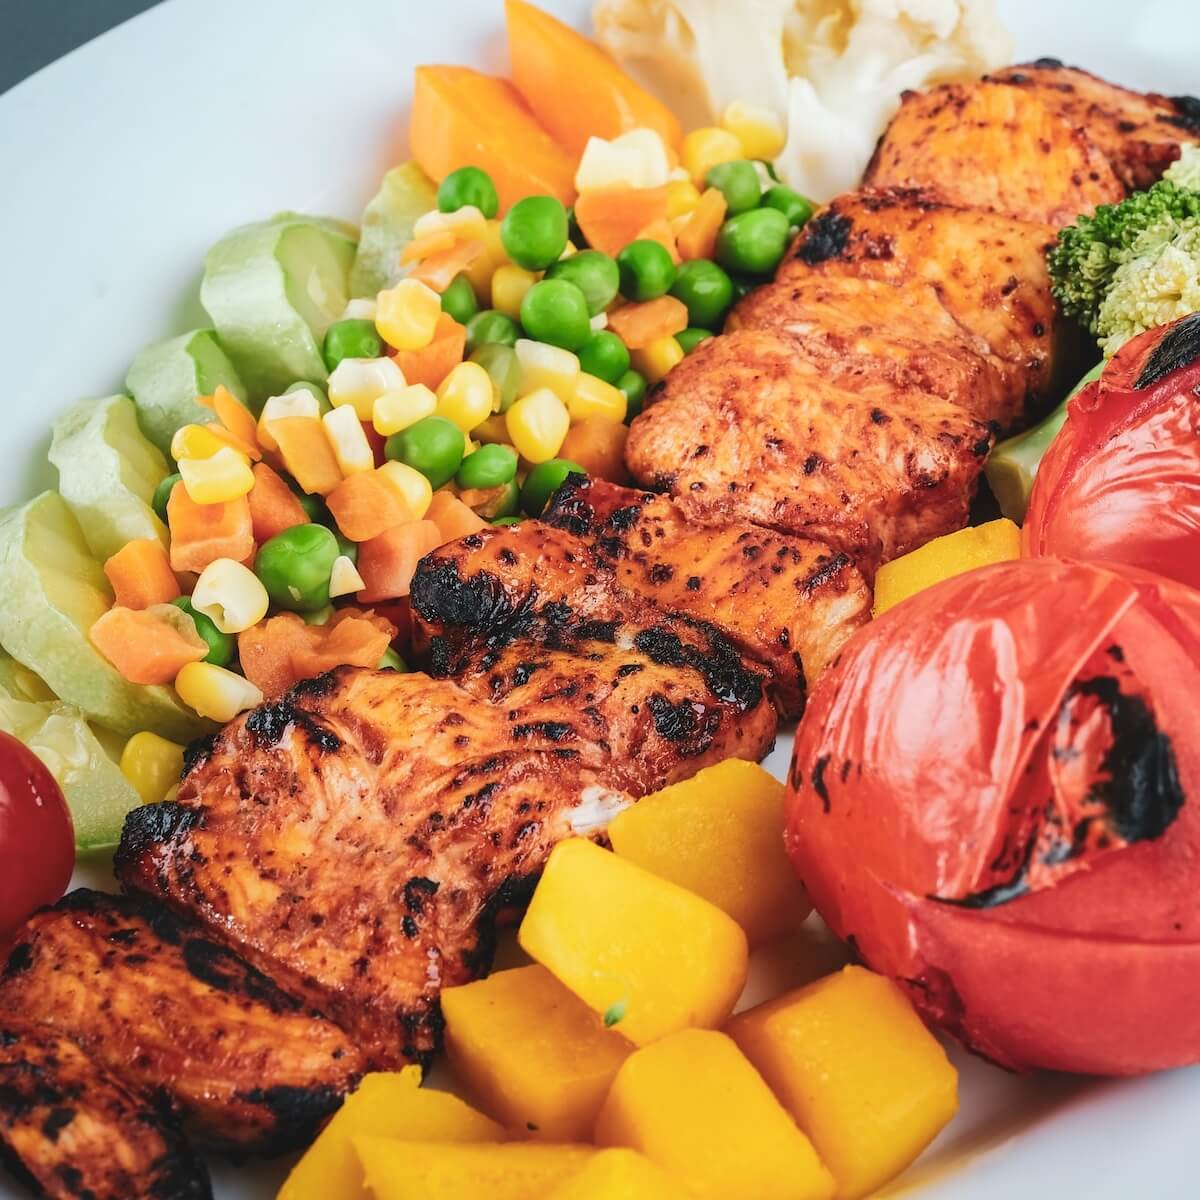 Healthy Homemade Grilled chicken dinner with colorful roasted veggies served in a white ceramic plate.